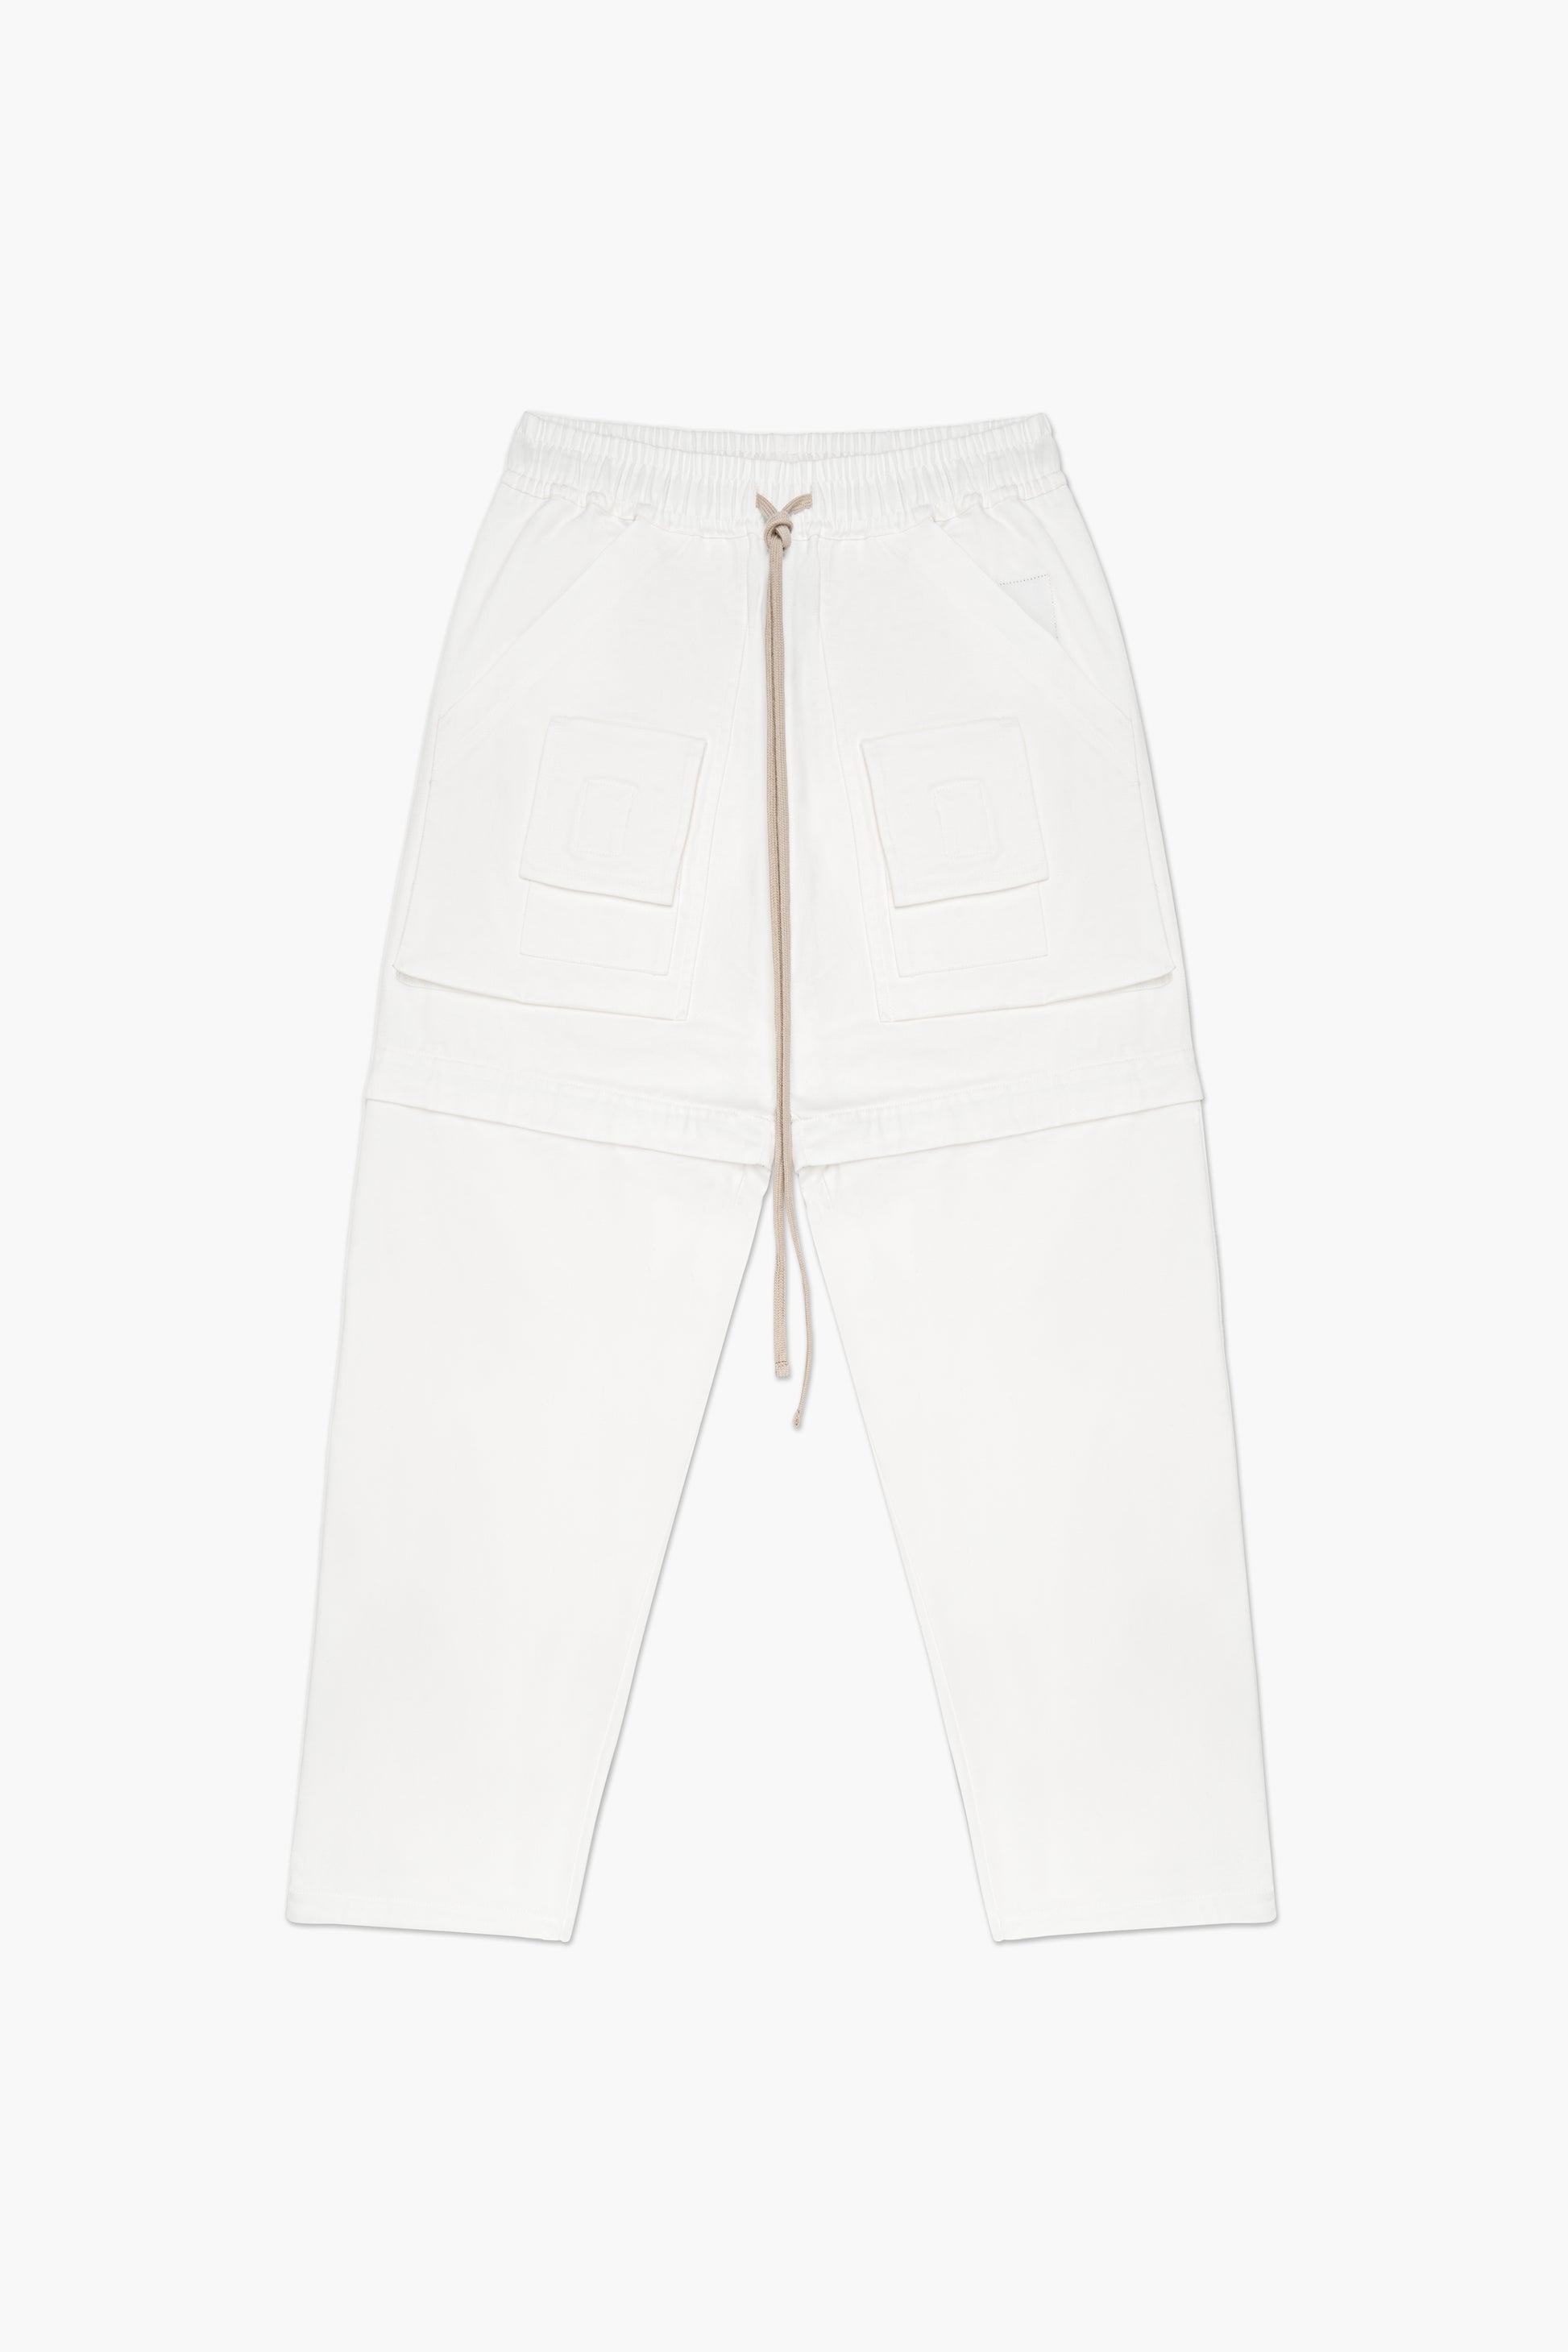 Front of white convertible pants ovnnie